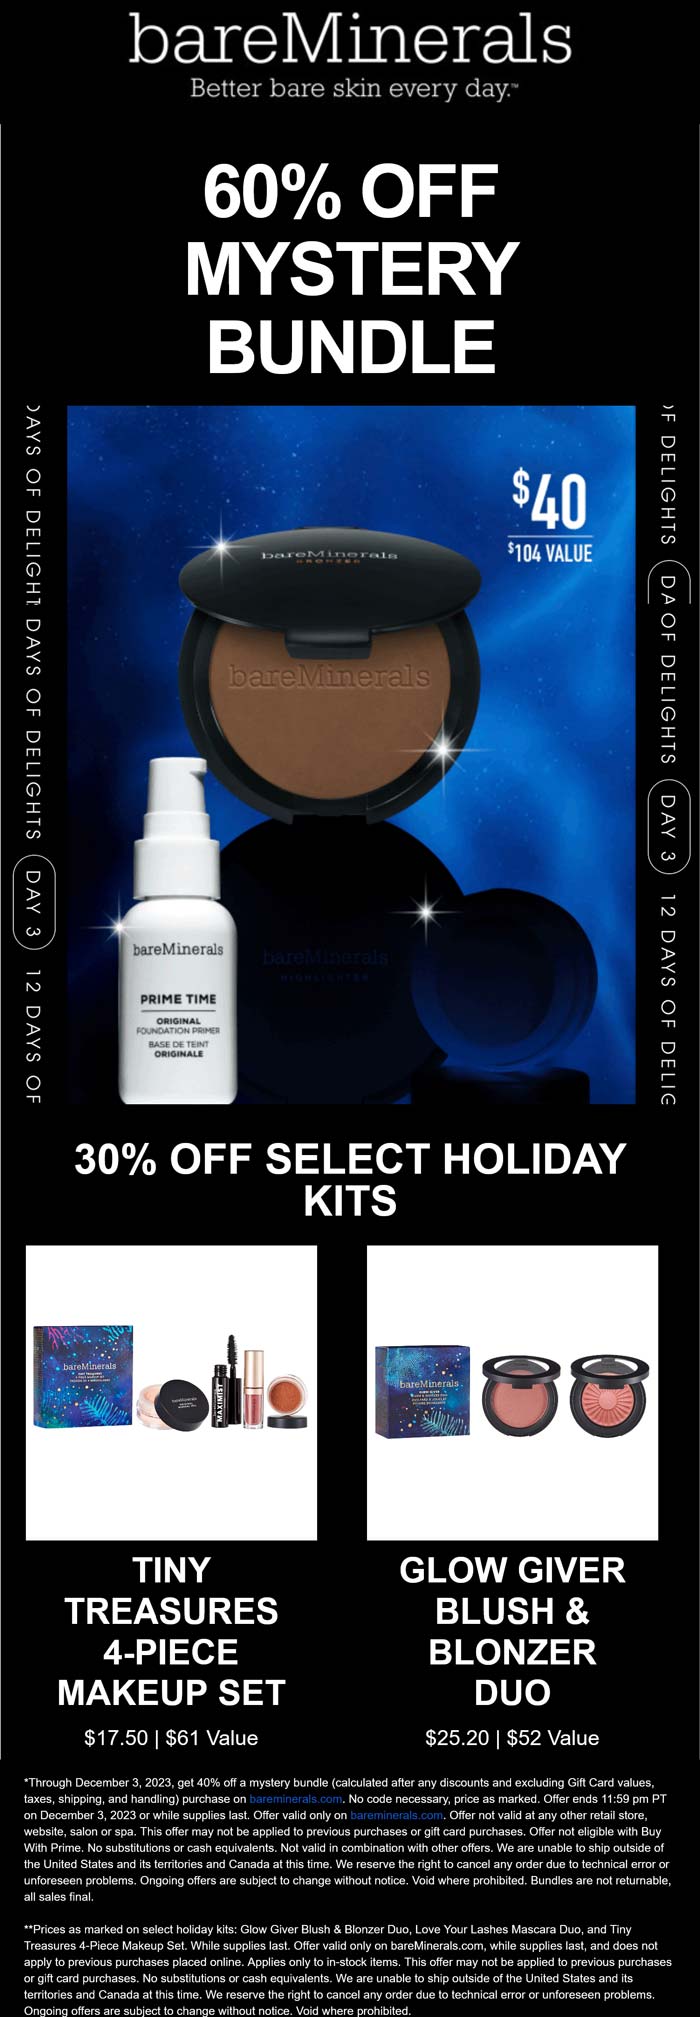 bareMinerals stores Coupon  60% off mystery bundle & more today at bareMinerals #bareminerals 